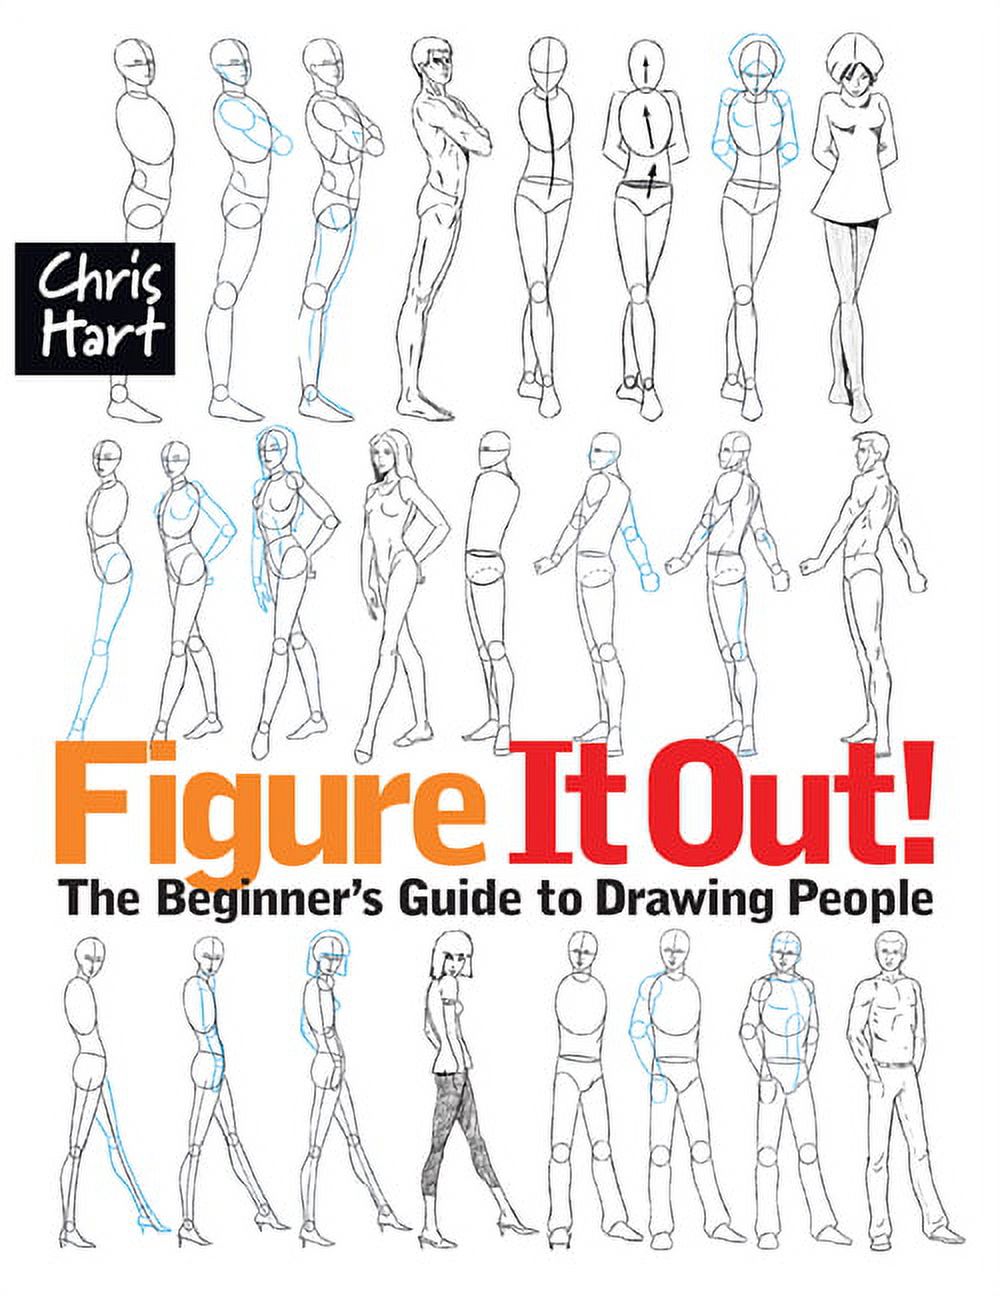 Figure It Out!: The Beginner's Guide to Drawing People (Paperback) - image 1 of 3